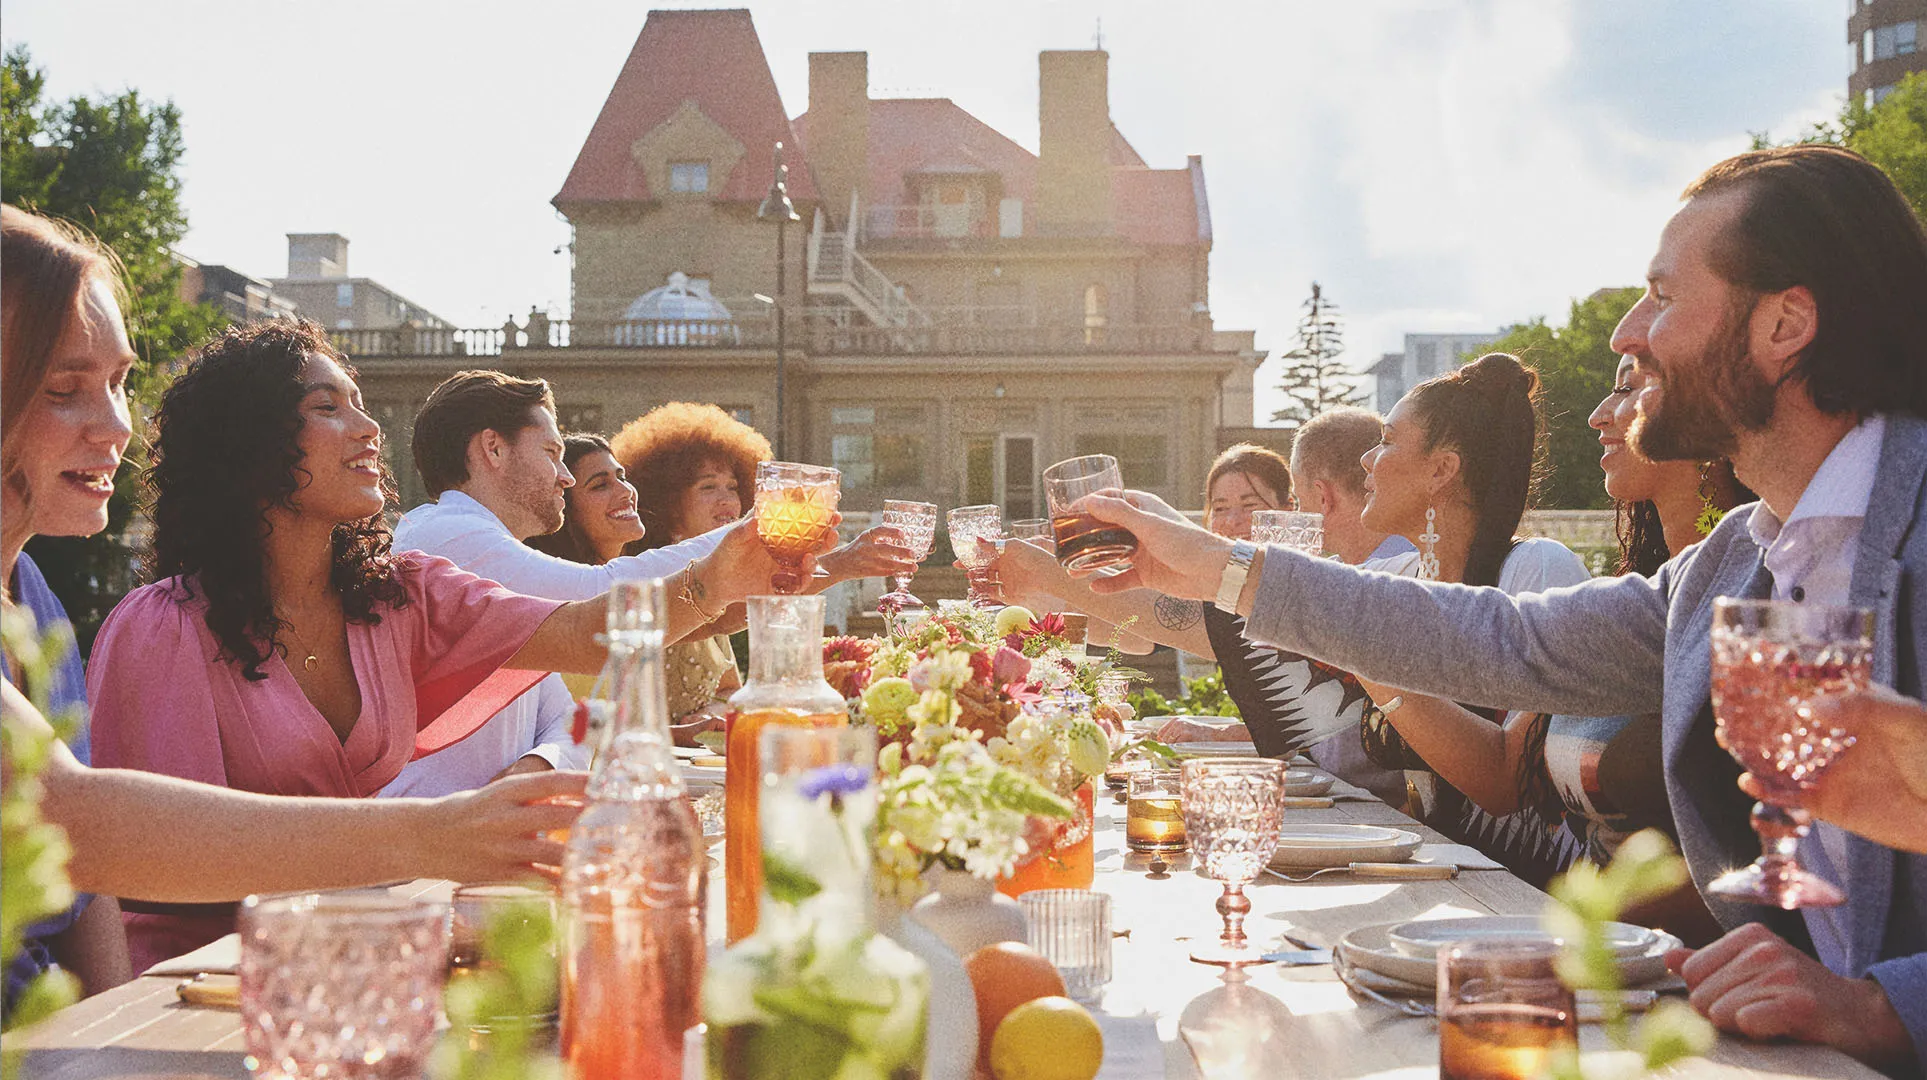 group dining at a long table during a private event held at Lougheed House during spring